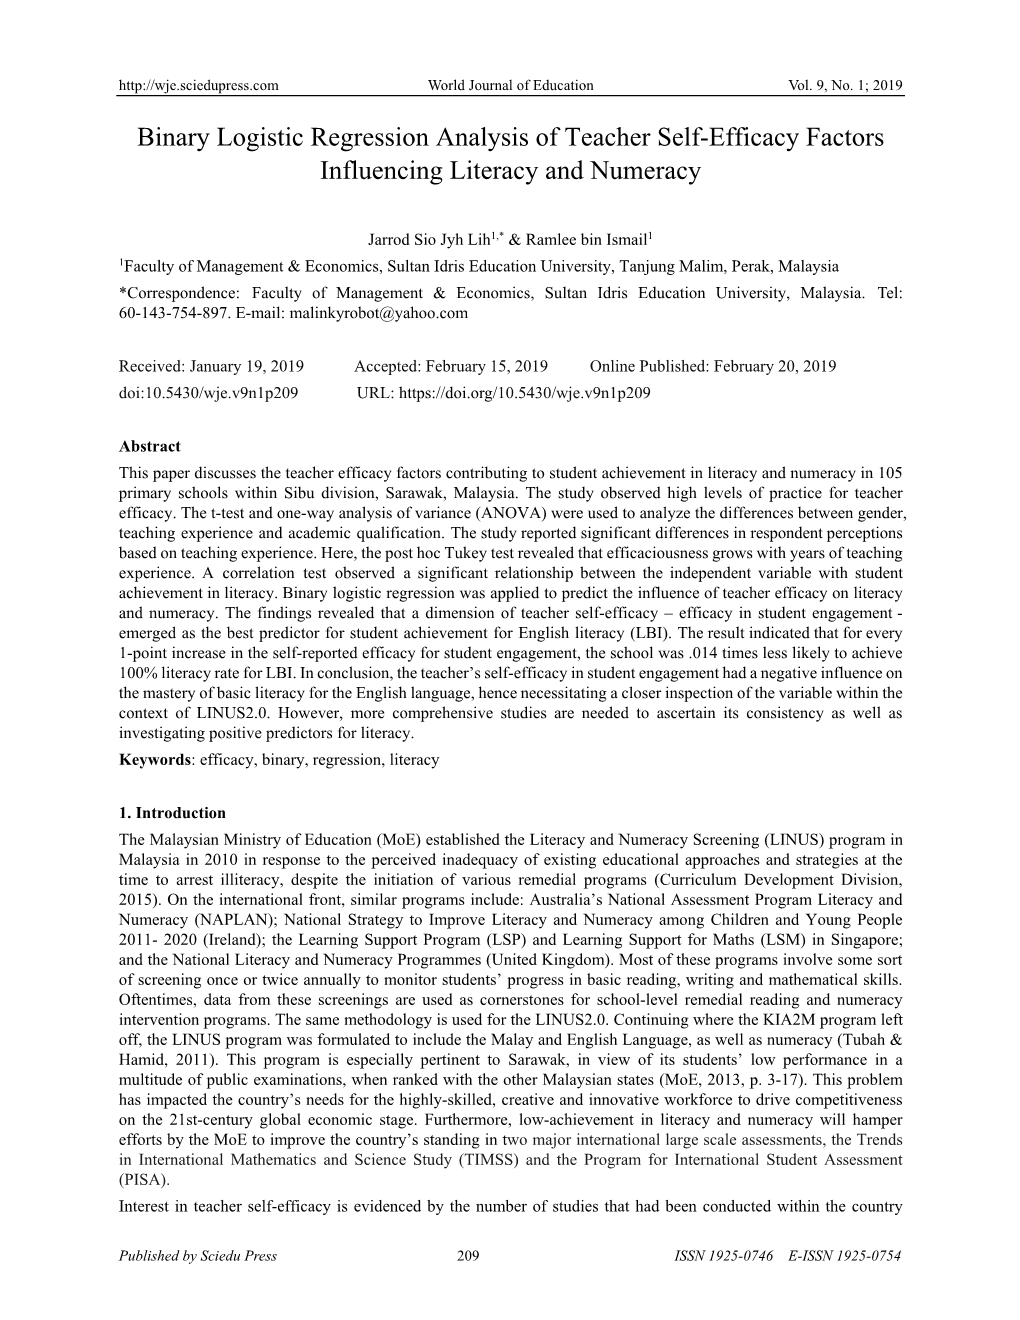 Binary Logistic Regression Analysis of Teacher Self-Efficacy Factors Influencing Literacy and Numeracy